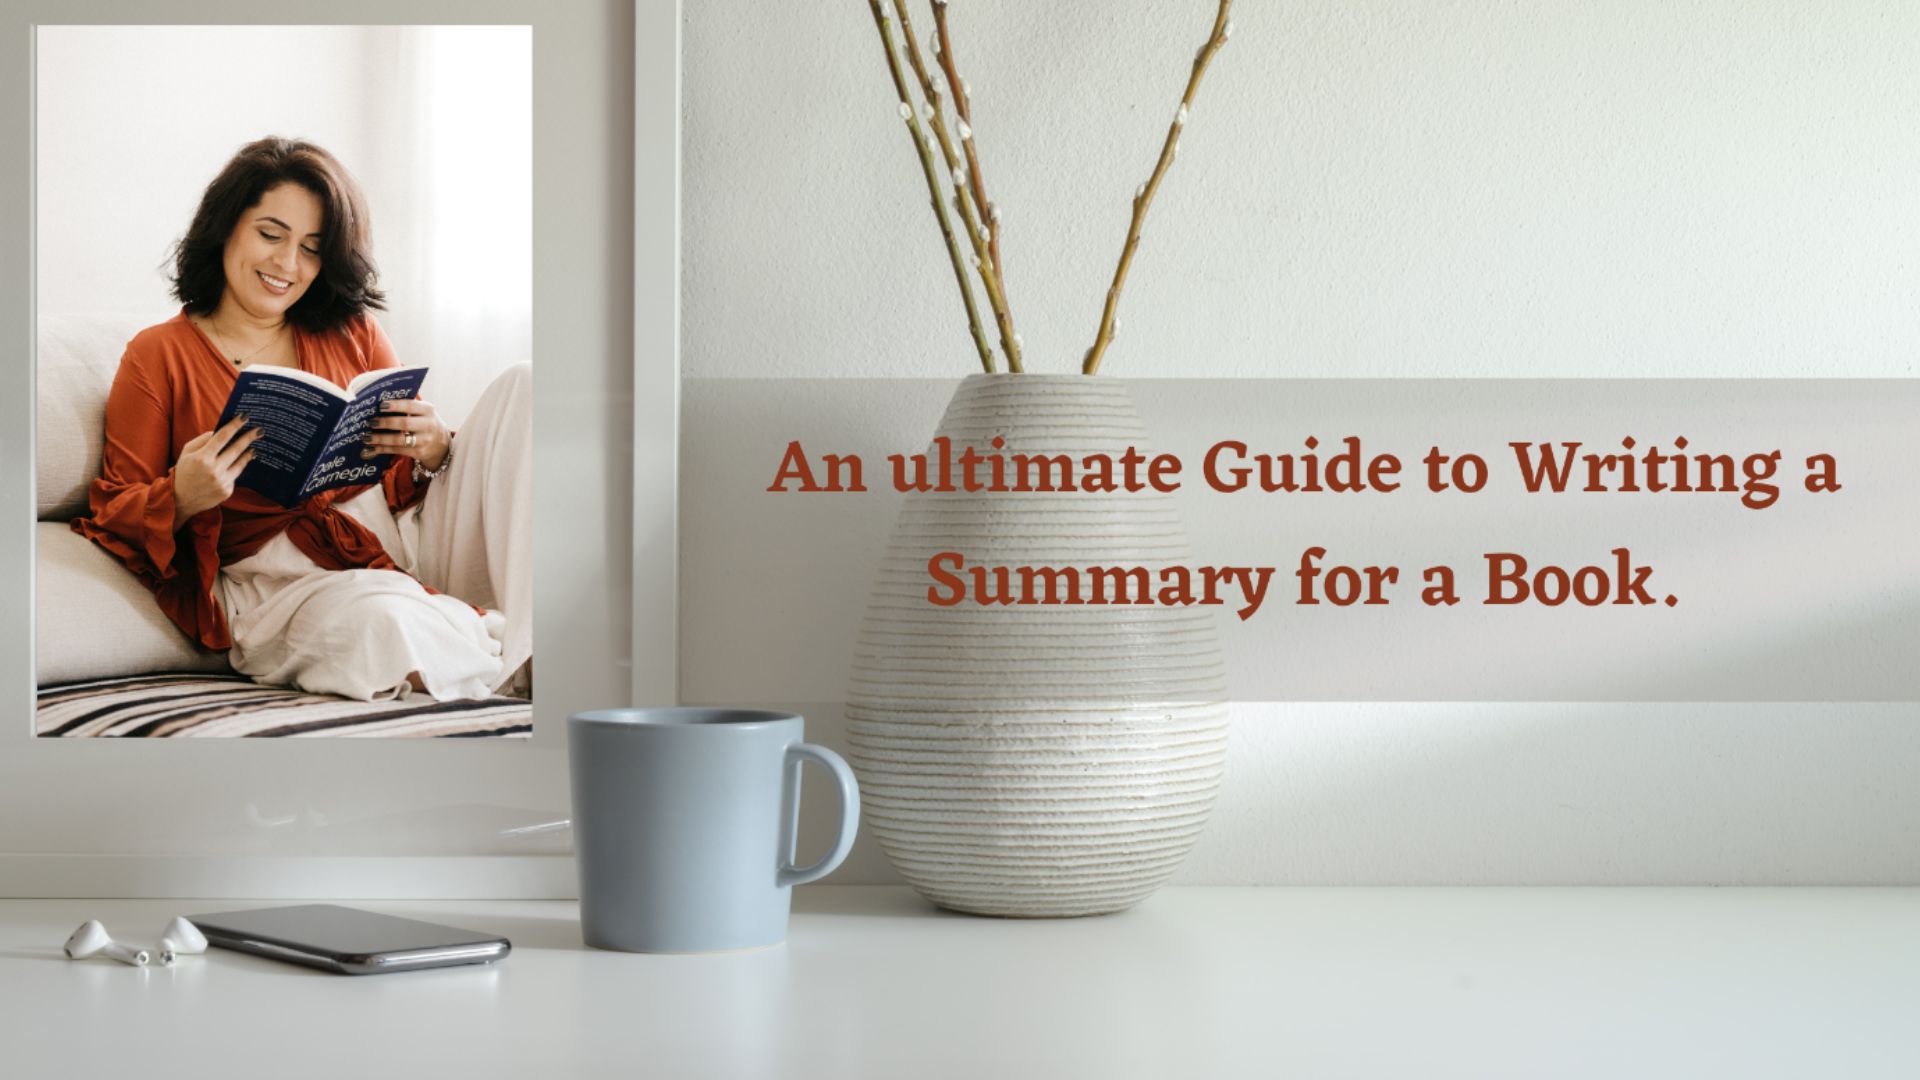 An-ultimate-Guide-to-Writing-a-Summary-for-a-Book-Feature-Image.